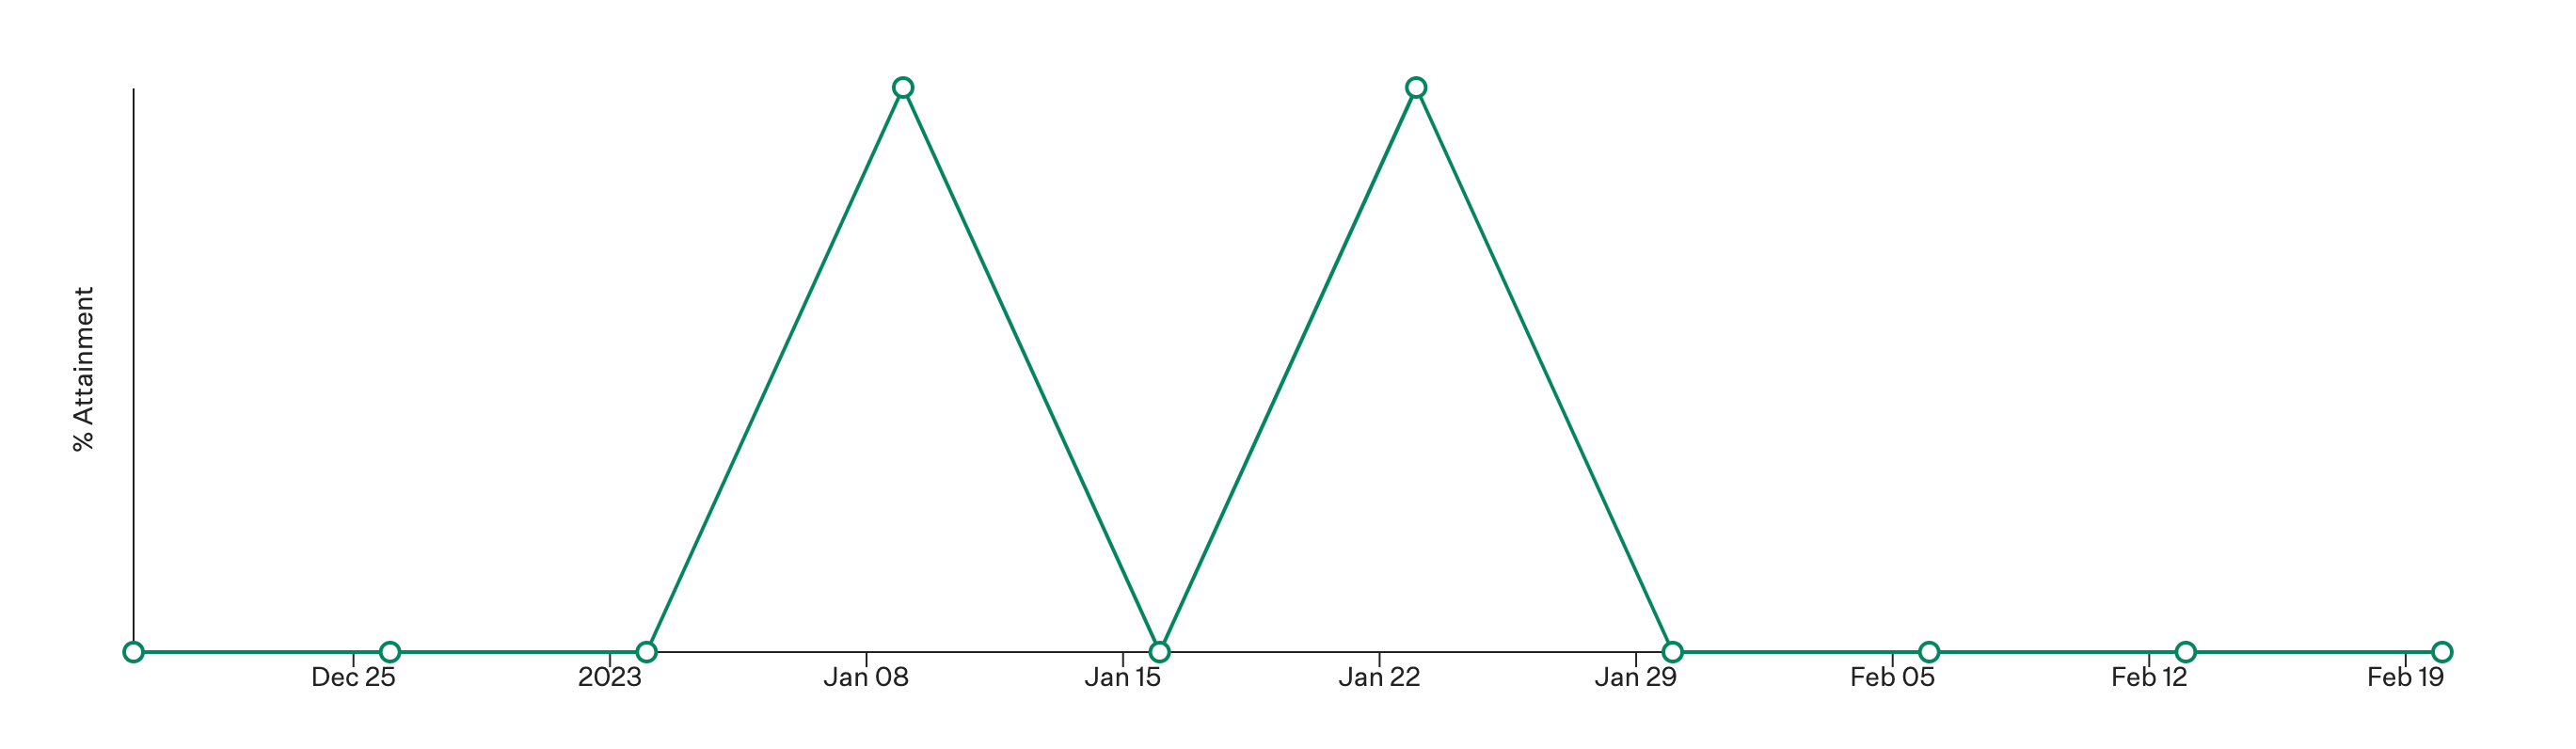 Time-to-approve-offer-goal-report-visualization-graph.png